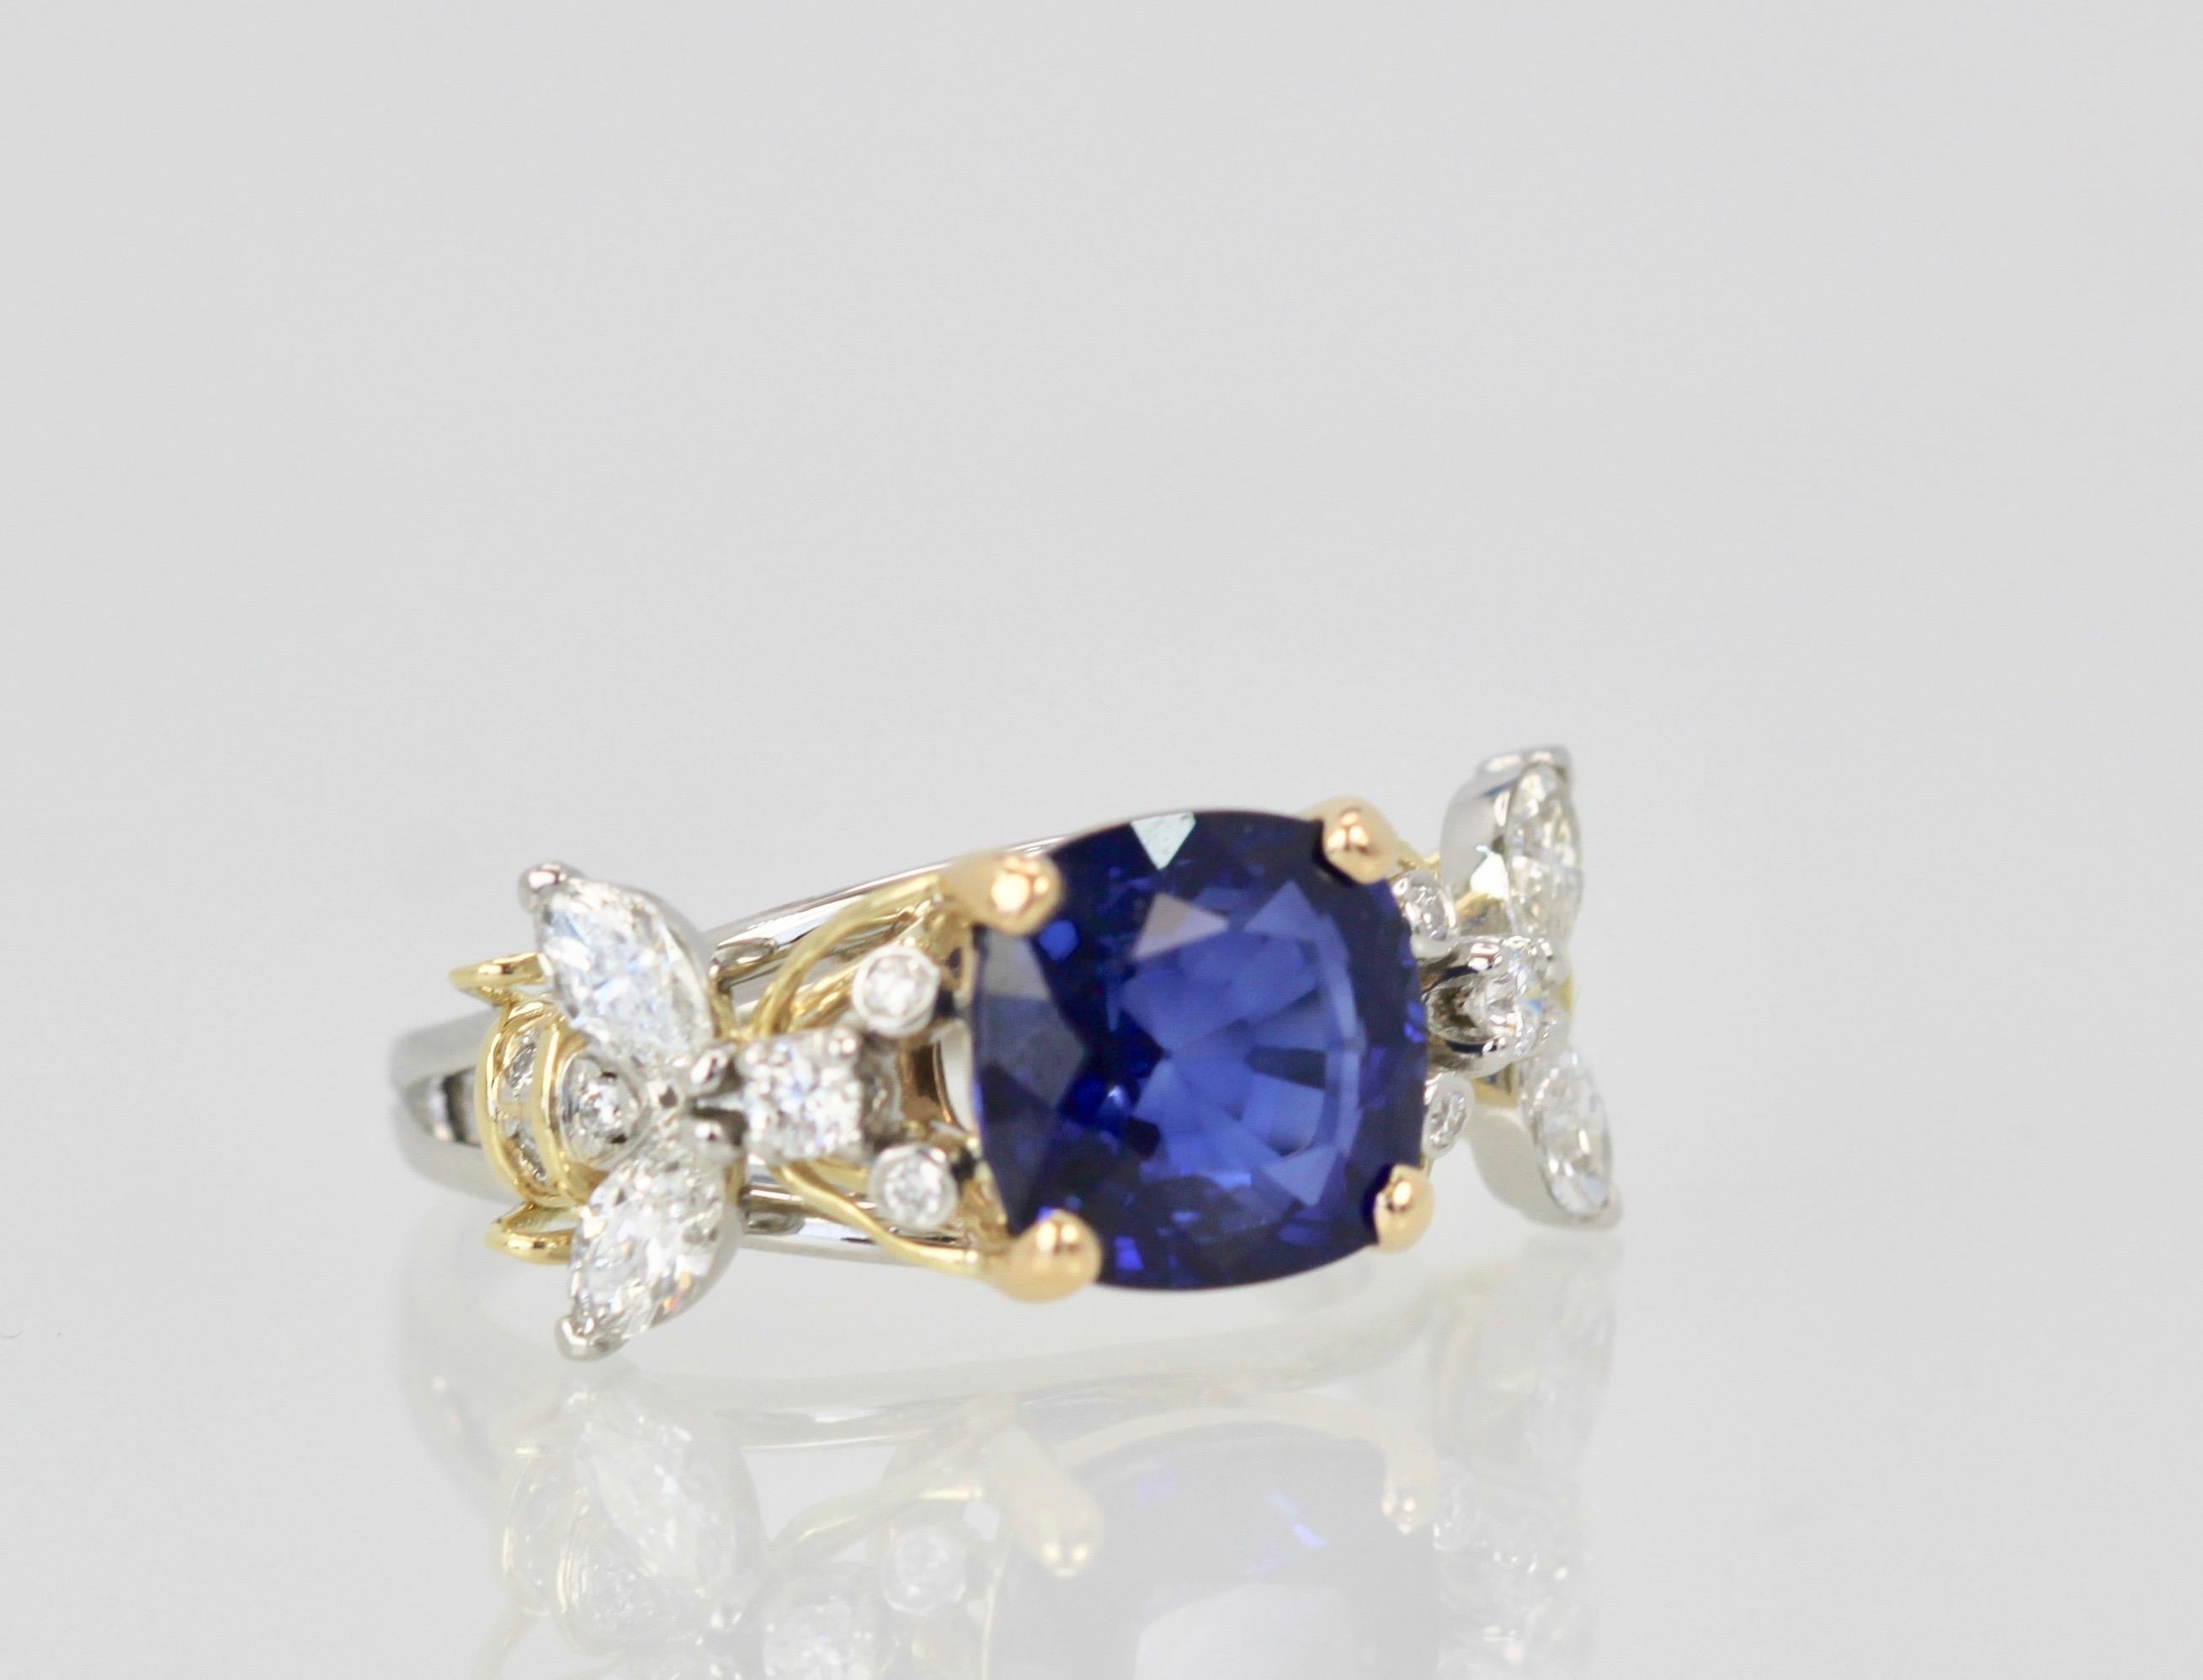 This Tiffany double bee ring with center Sapphire is highly coveted and hard to find.  This ring features a gorgeous Blue Sapphire of 4.39 Carats cushion cut w/ AGI certificate.  There are 4 marquise Diamonds weighting 0.60 carats, round brillant